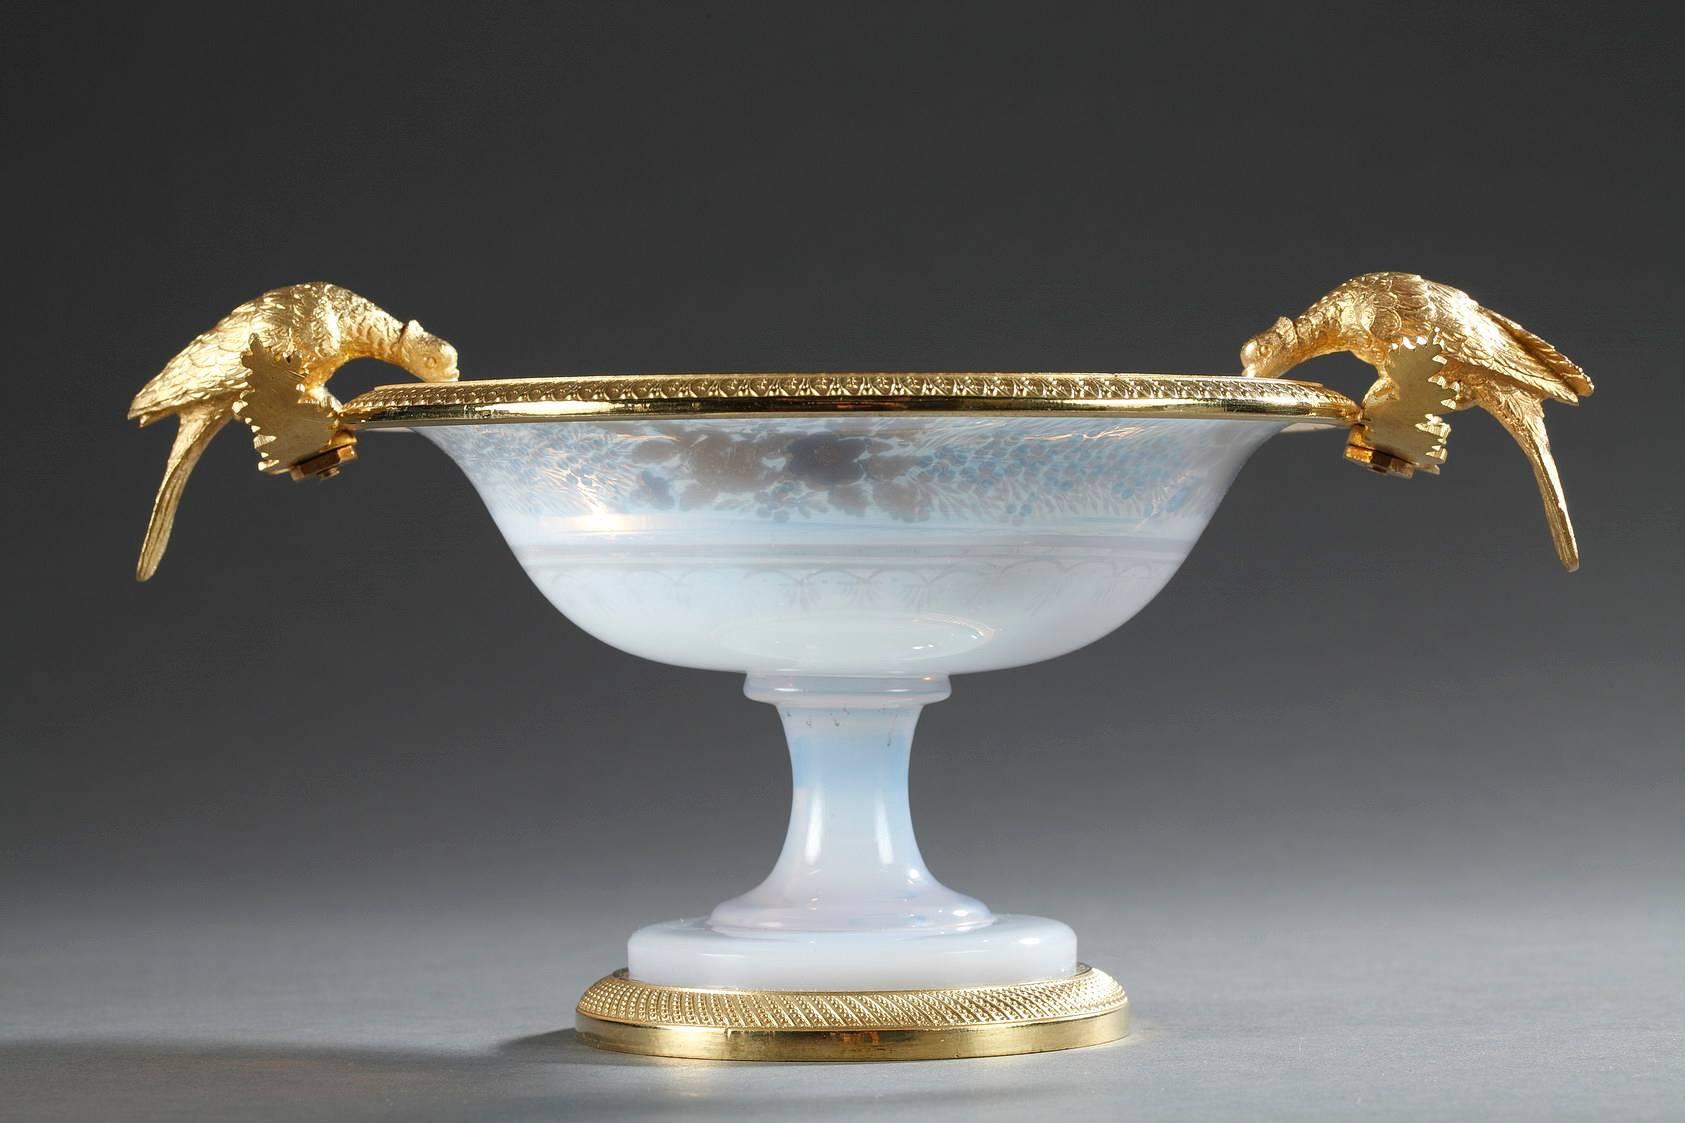 White opaline cup with gilt bronze mounts. The upper, gilded rim is finely sculpted with water-leaf, and the foot is encircled with a gilded ring decorated with angled grooves with beads. The handles are in the form of two pheasants that are resting